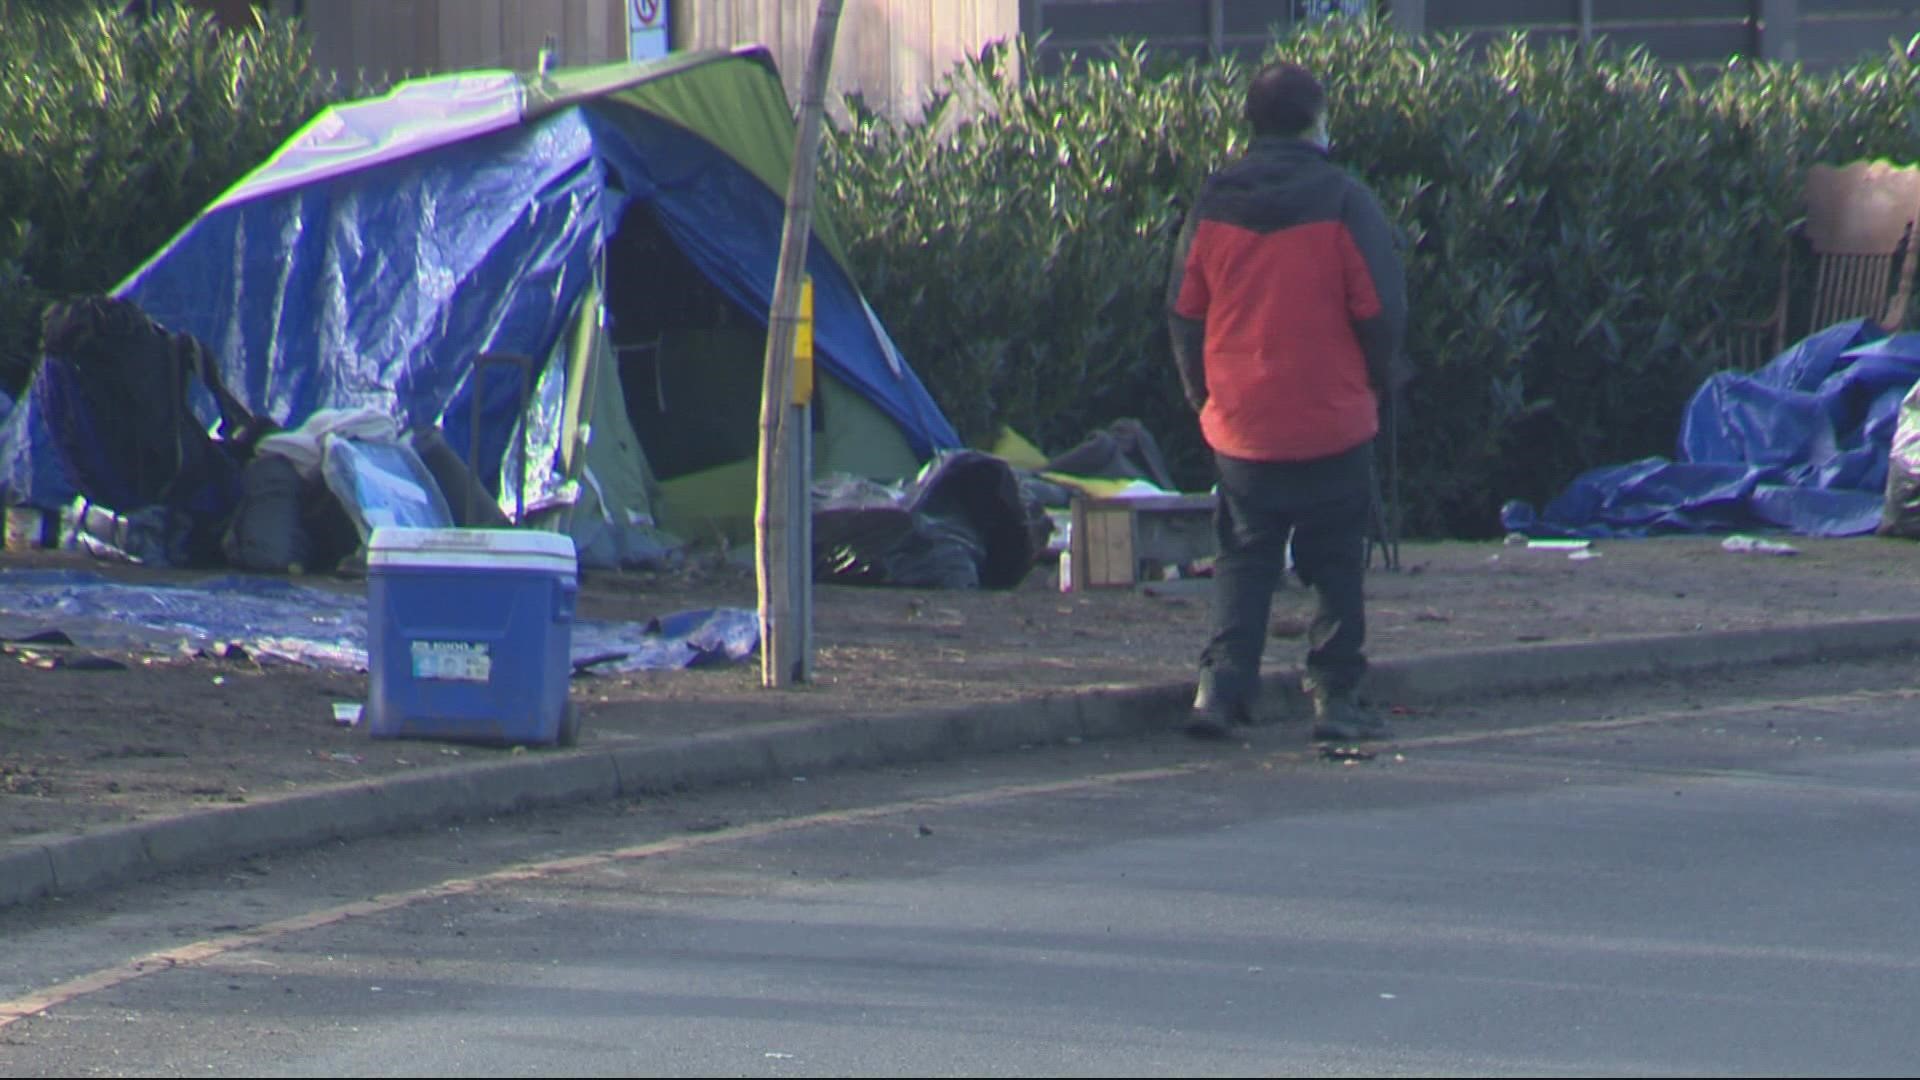 The Oregonian reports that Wheeler also plans to announce a new plan next week to address the city's homeless crisis on a larger scale.